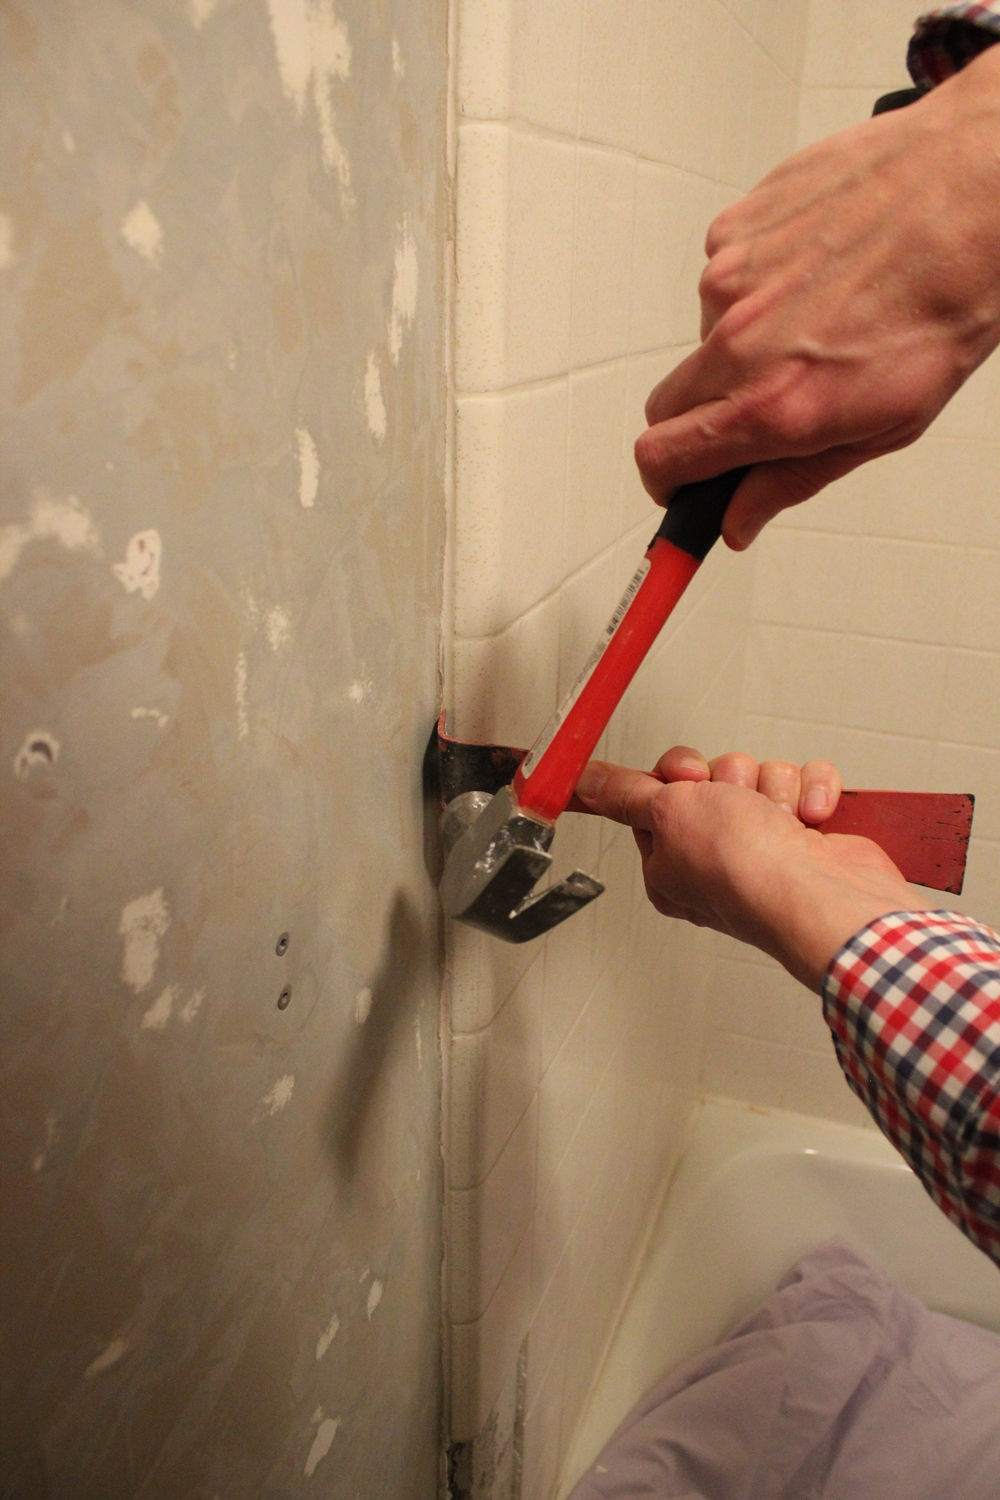 DIY Remove Tub Surround Tile - with hammer